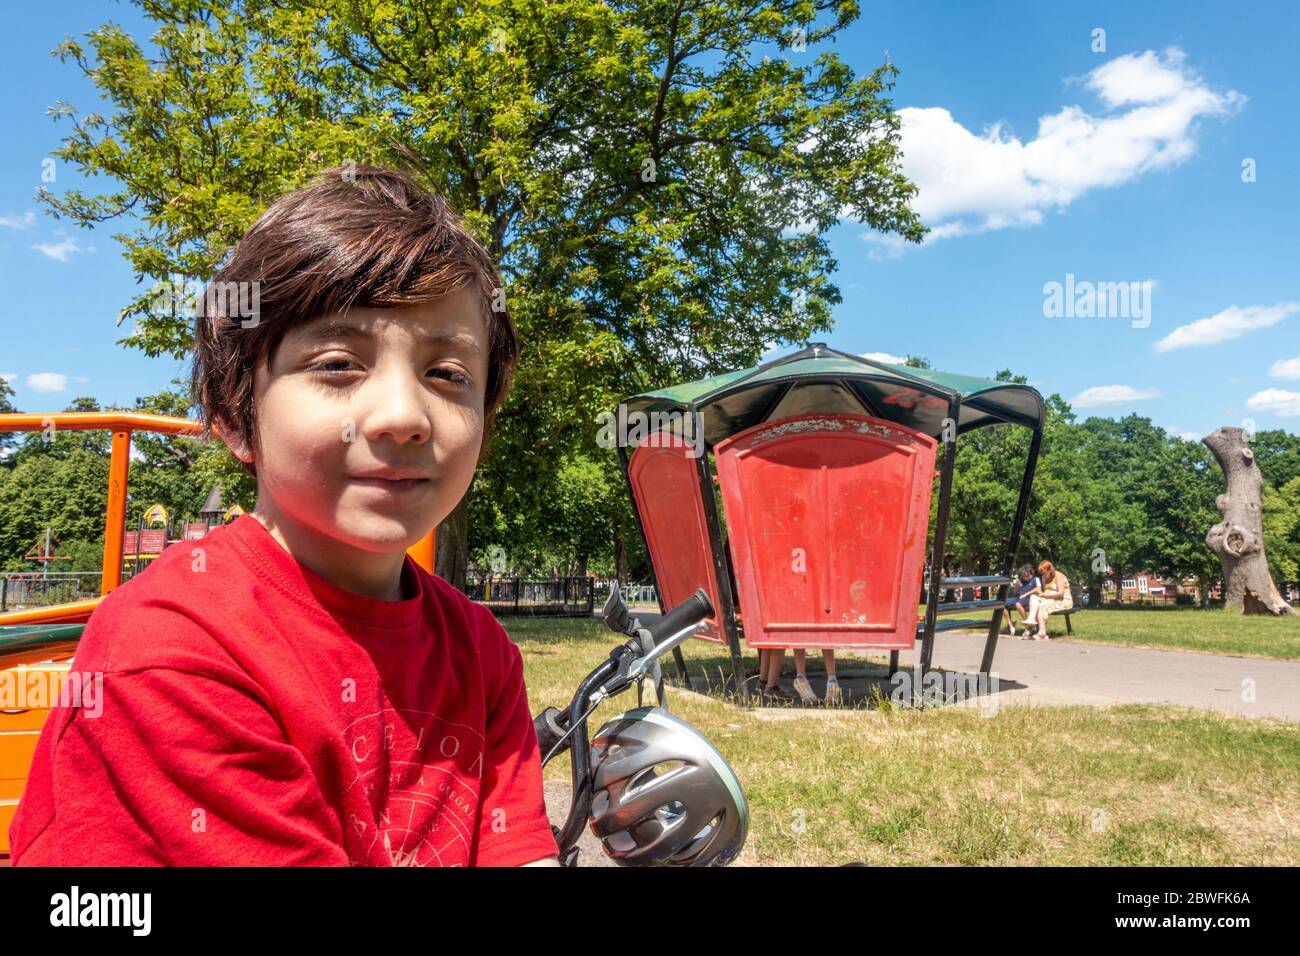 A young boy poses for a portrait in the park. Stock Photo